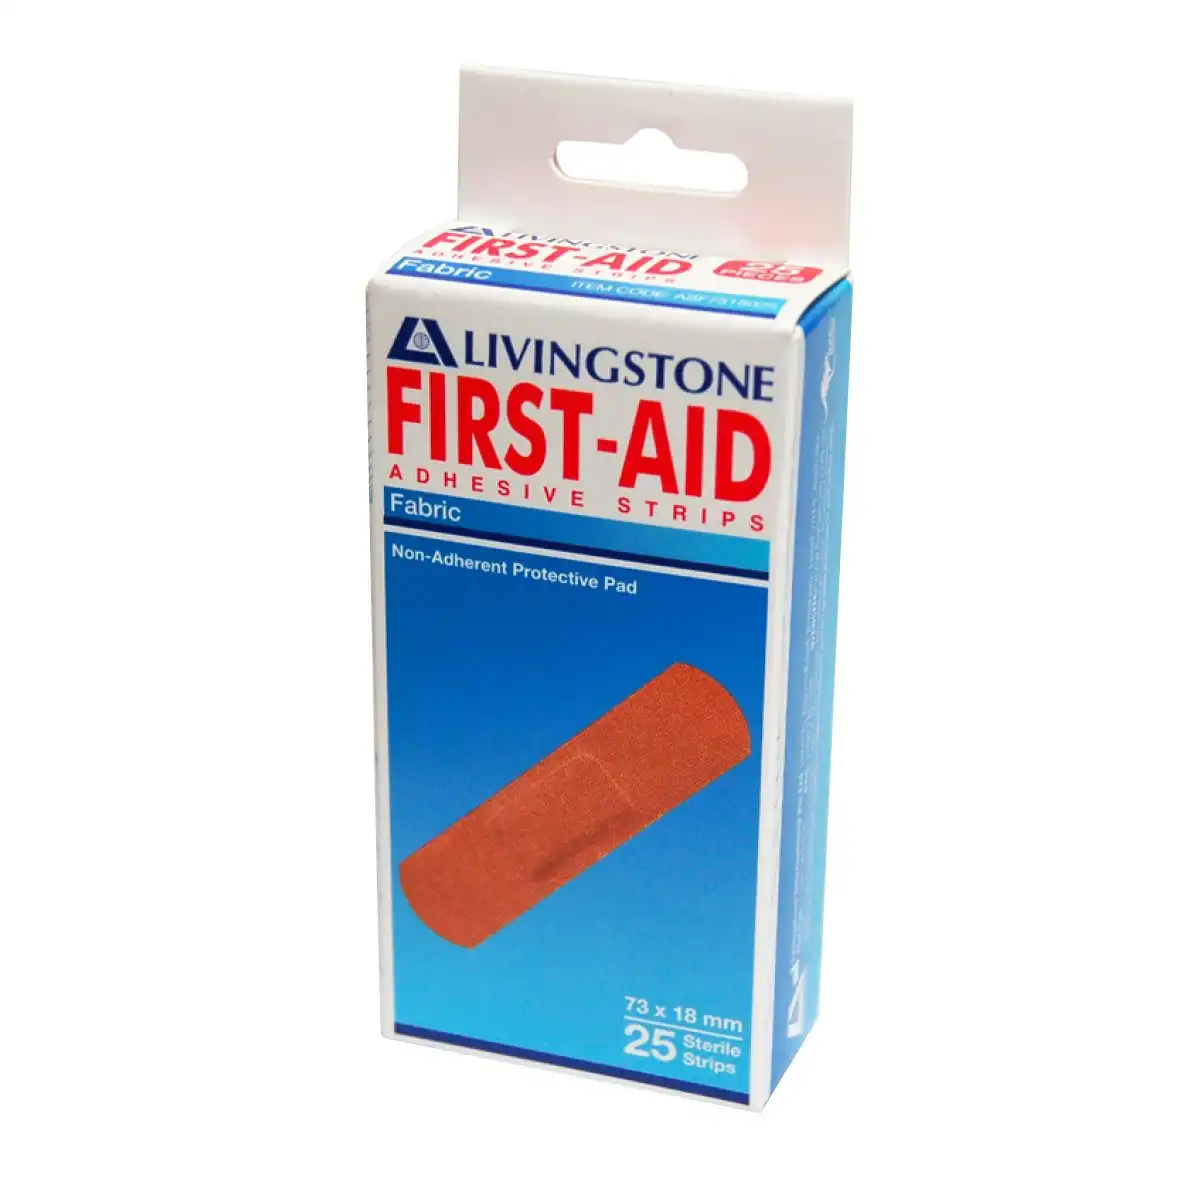 Livingstone Adhesive Fabric First Aid Strips with Pad Latex Free Sterile 73 x 18mm 25 Box